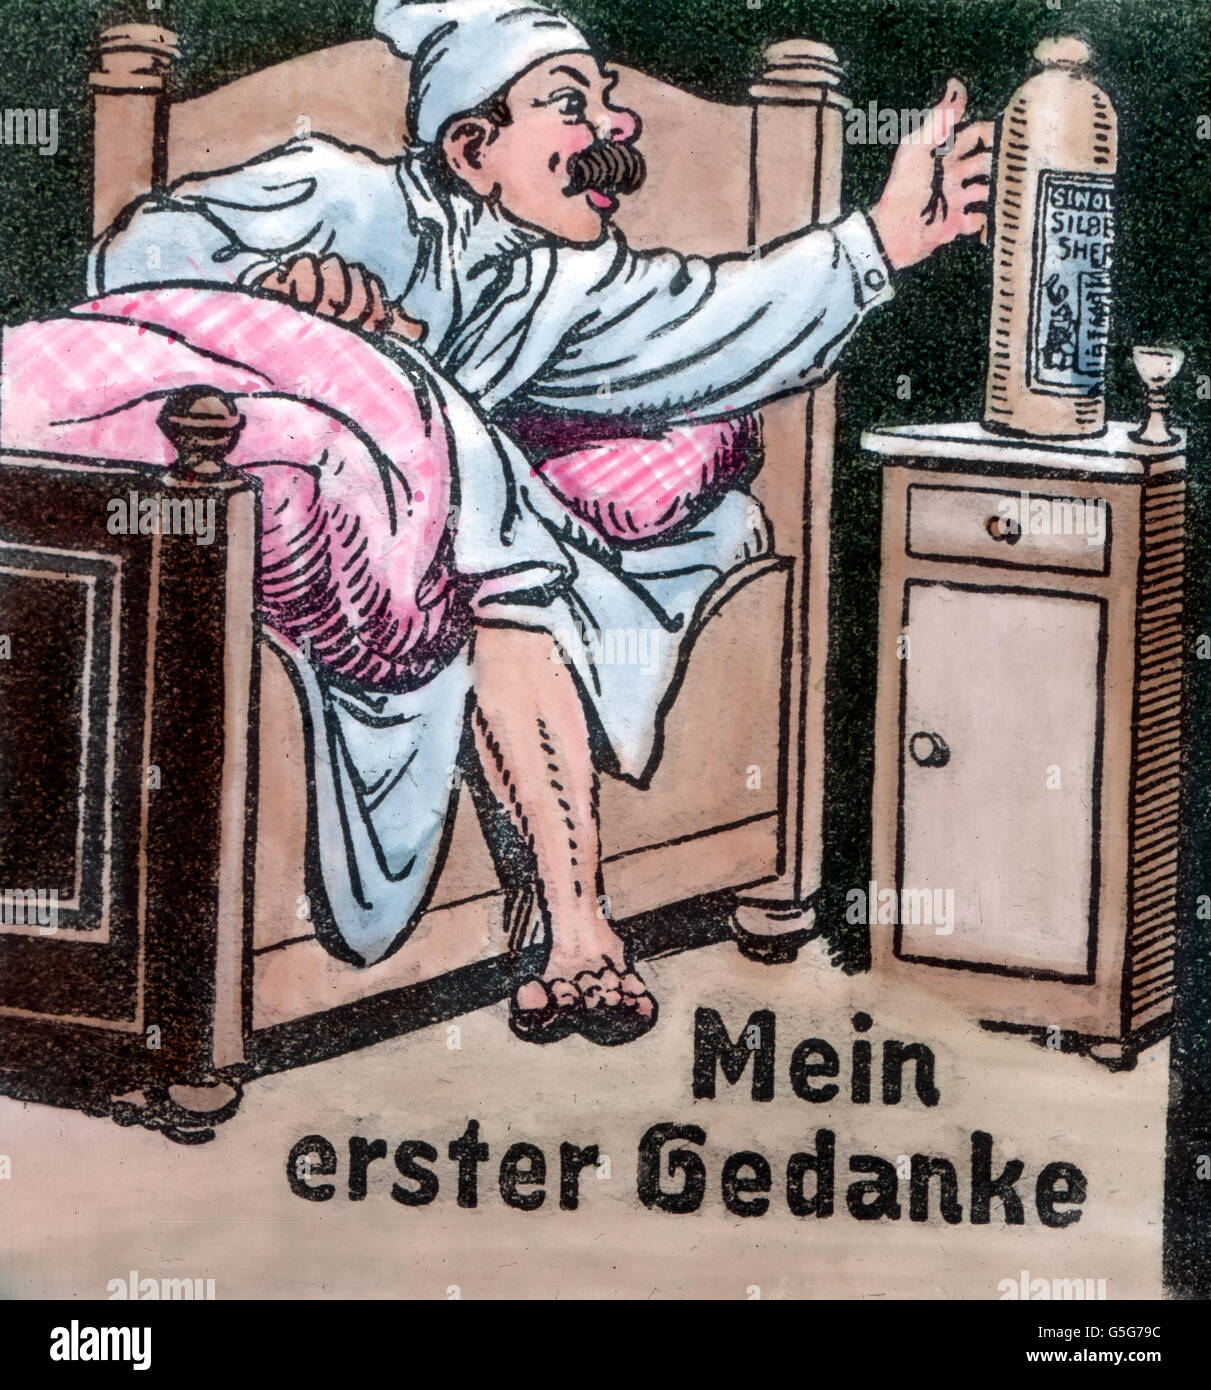 Sein erster Gedanke. First of all... man, bed, bedroom, bottle, spirits, drinking, waking up, illustration, alcohol, drug, history, historical, 1910s, 1920s, 20th century, archive, Carl Simon, hand coloured glass slide Stock Photo